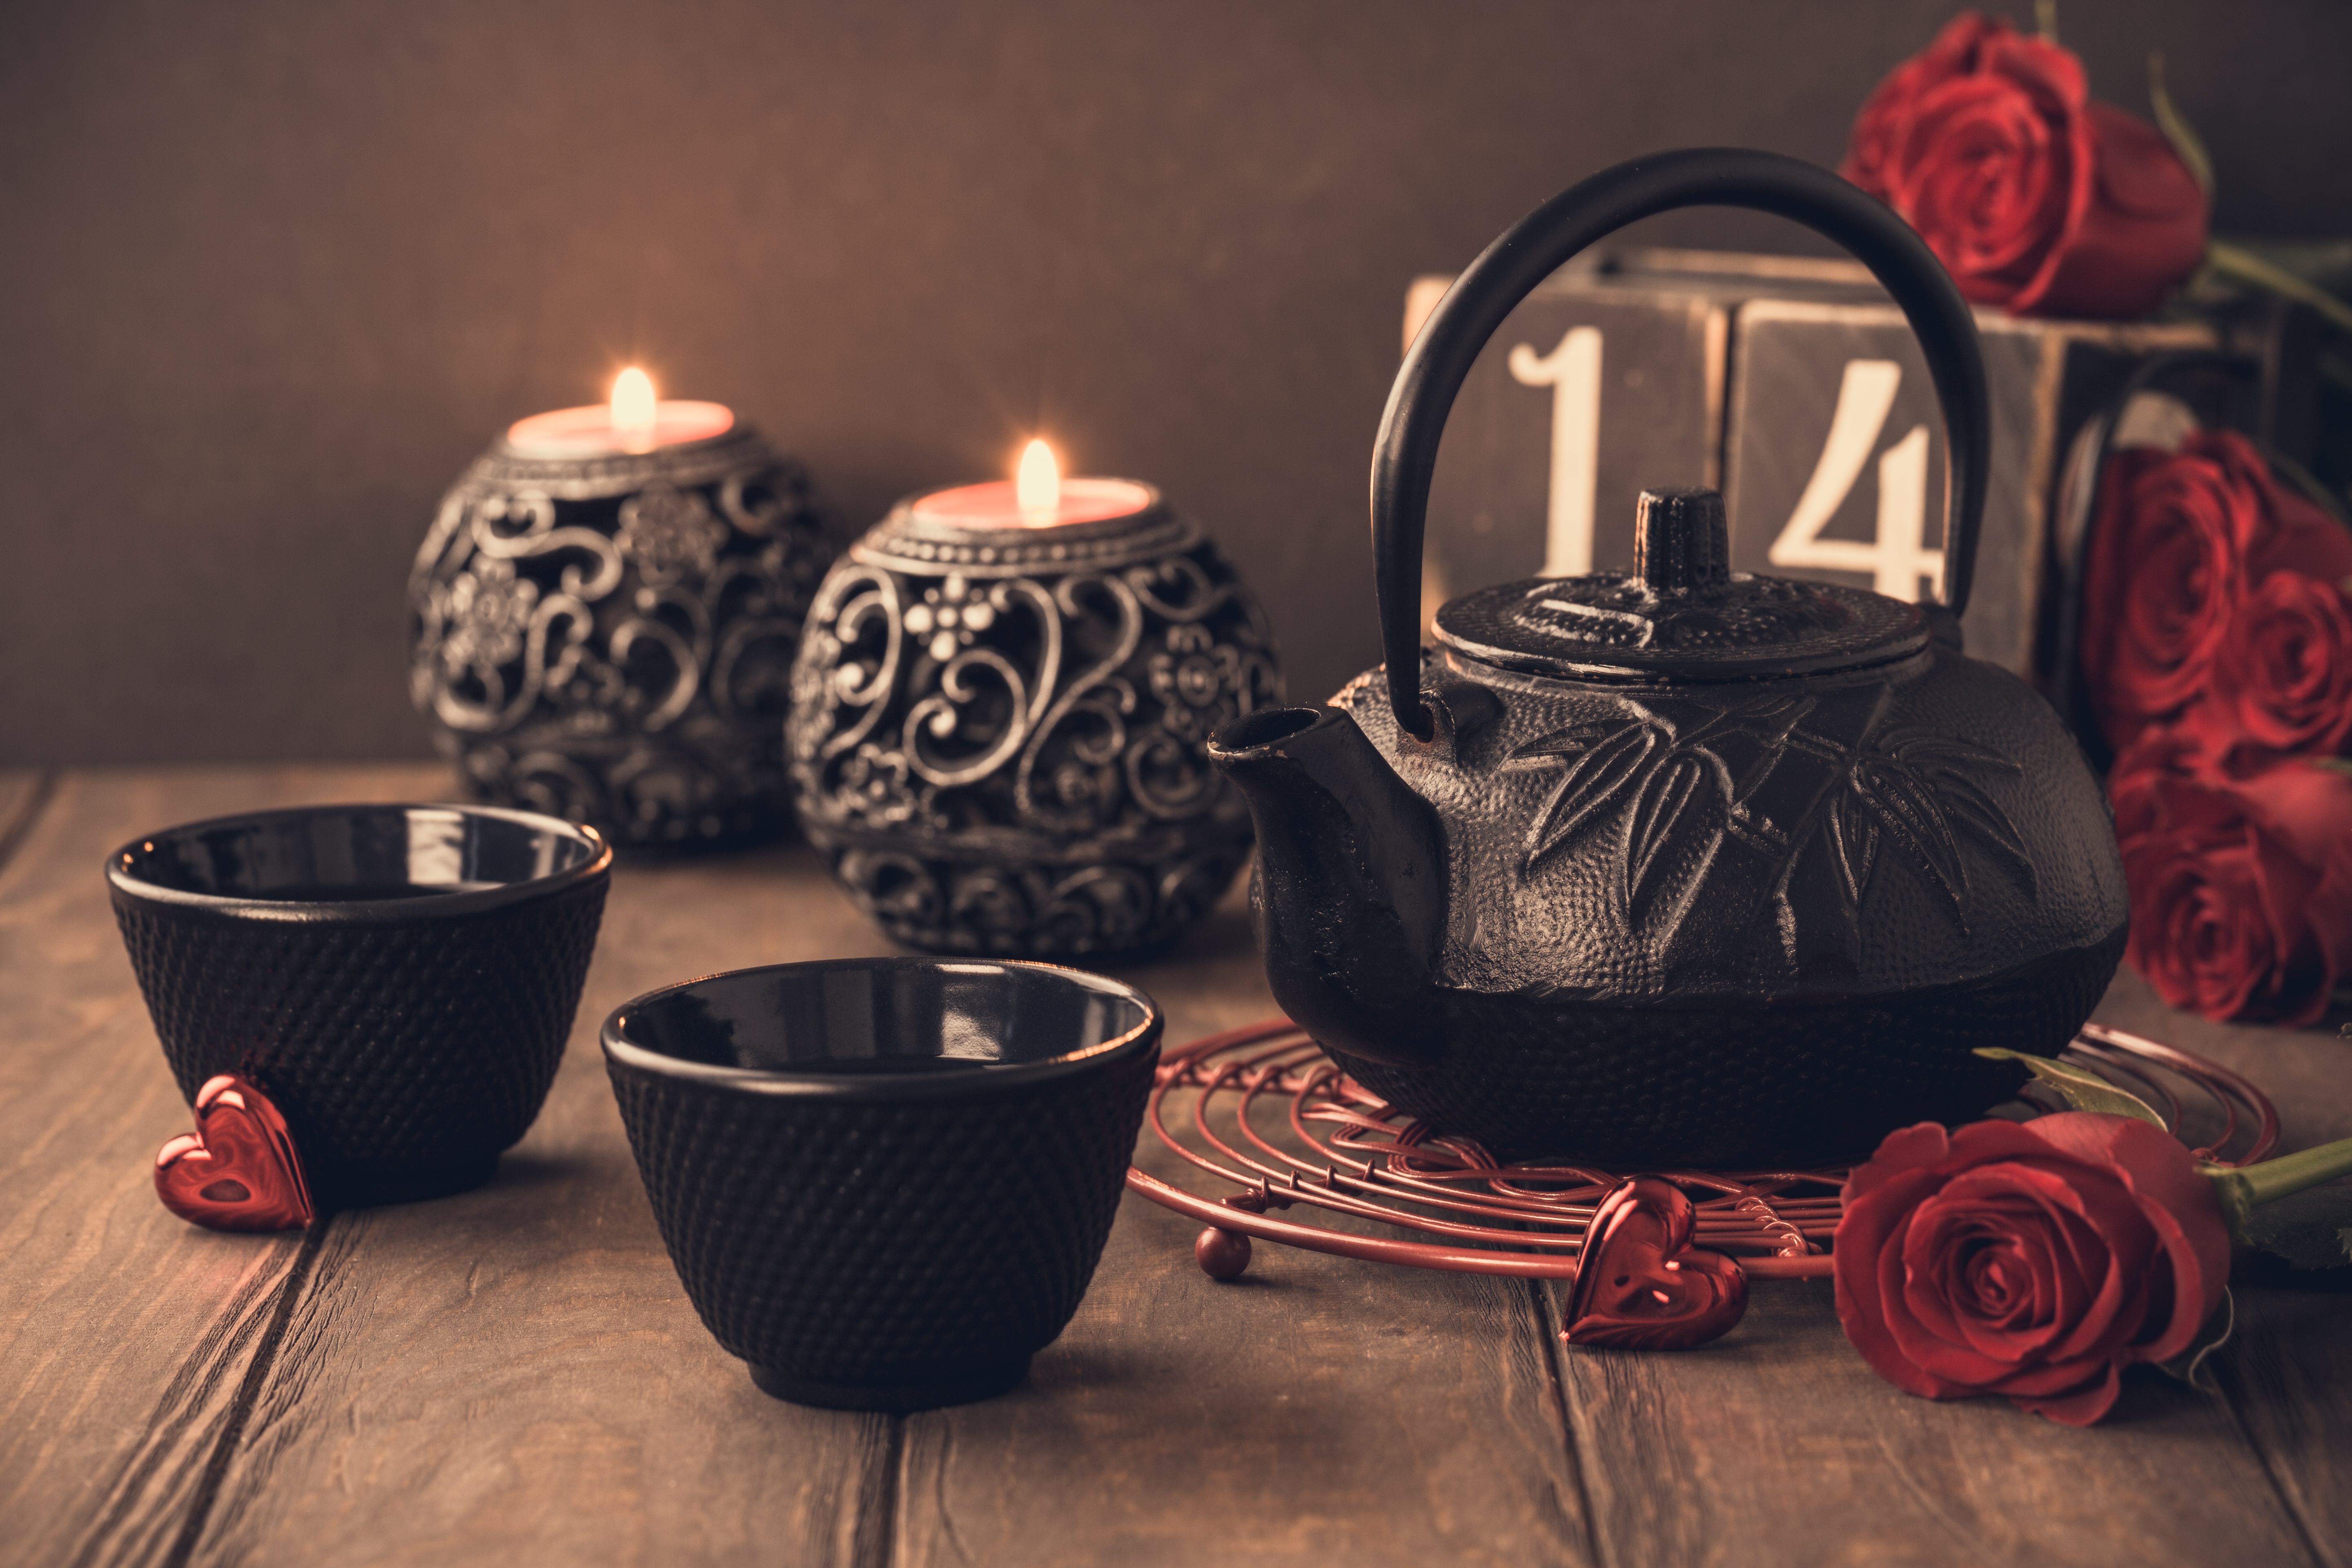 kettle, holiday, valentine's day, candle, cup, red flower, rose, still life lock screen backgrounds